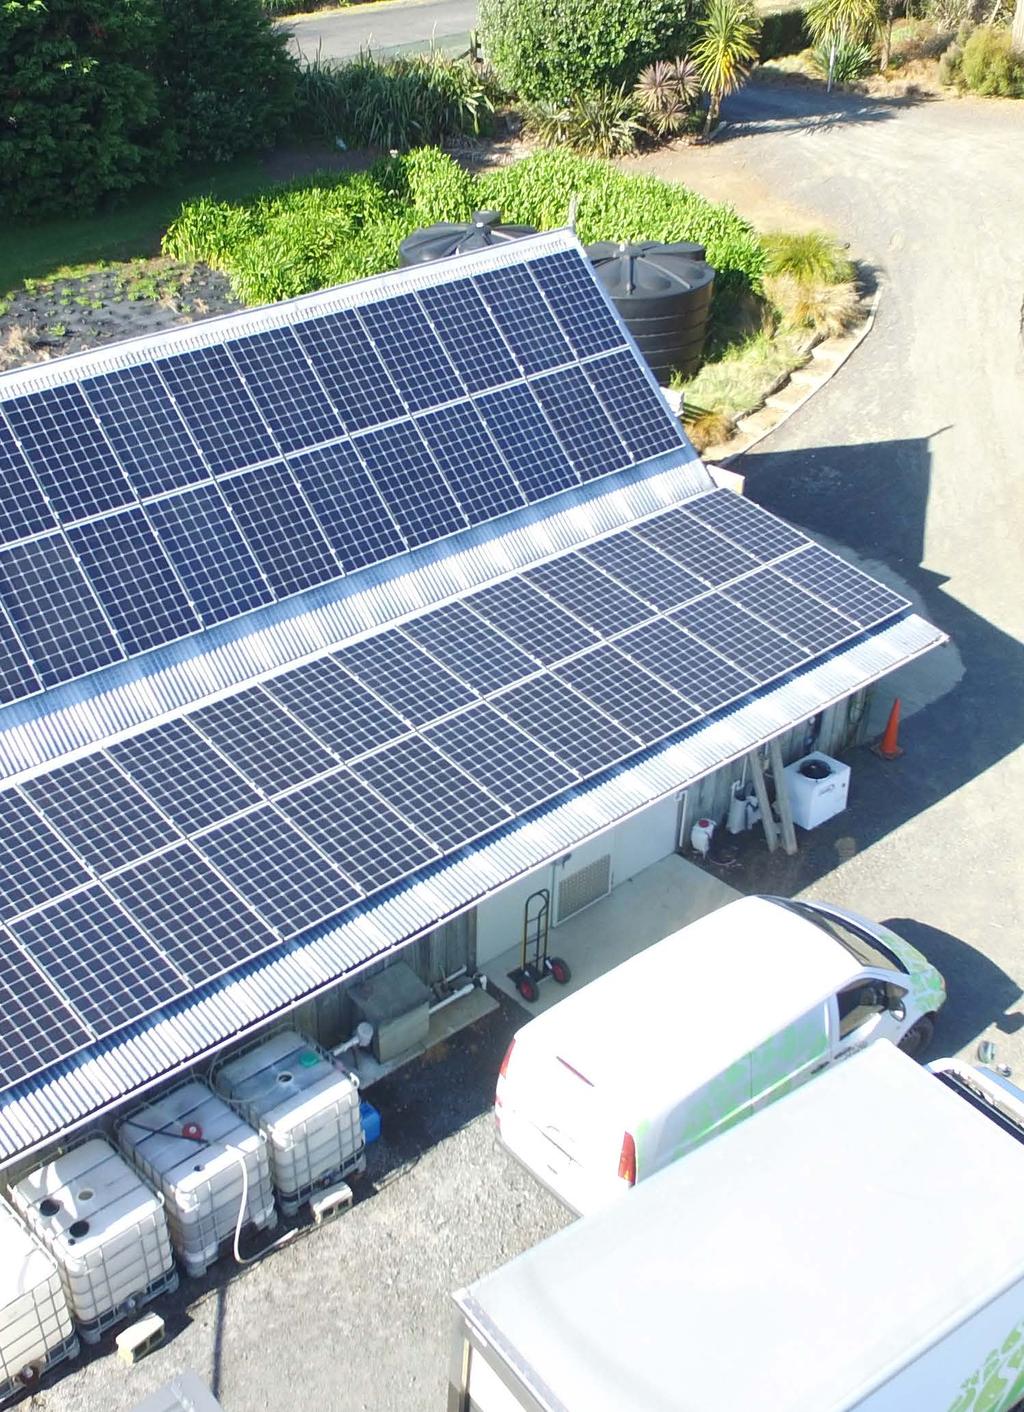 Reducing your power bills SkySolar offer grid-tied, hybrid (battery storage), and off grid solutions to suit your business requirements.